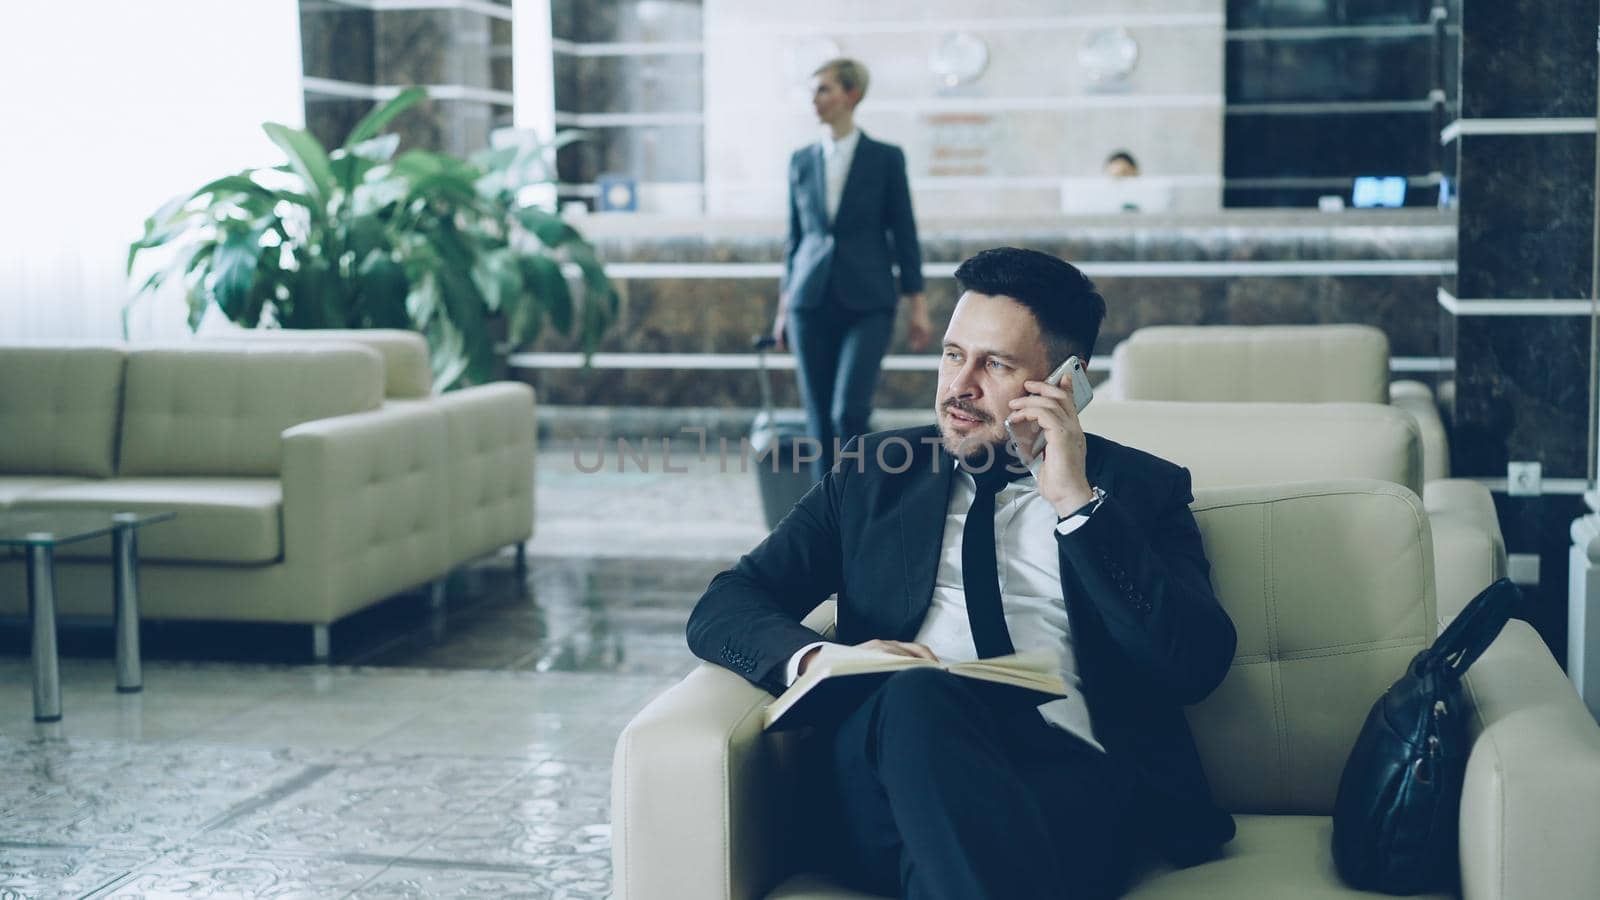 Pan shot of handsome bearded businessman sitting in armchair talking mobile phone with notepad while businesswoman in suit with luggage walking through hotel lobby from reception desk.